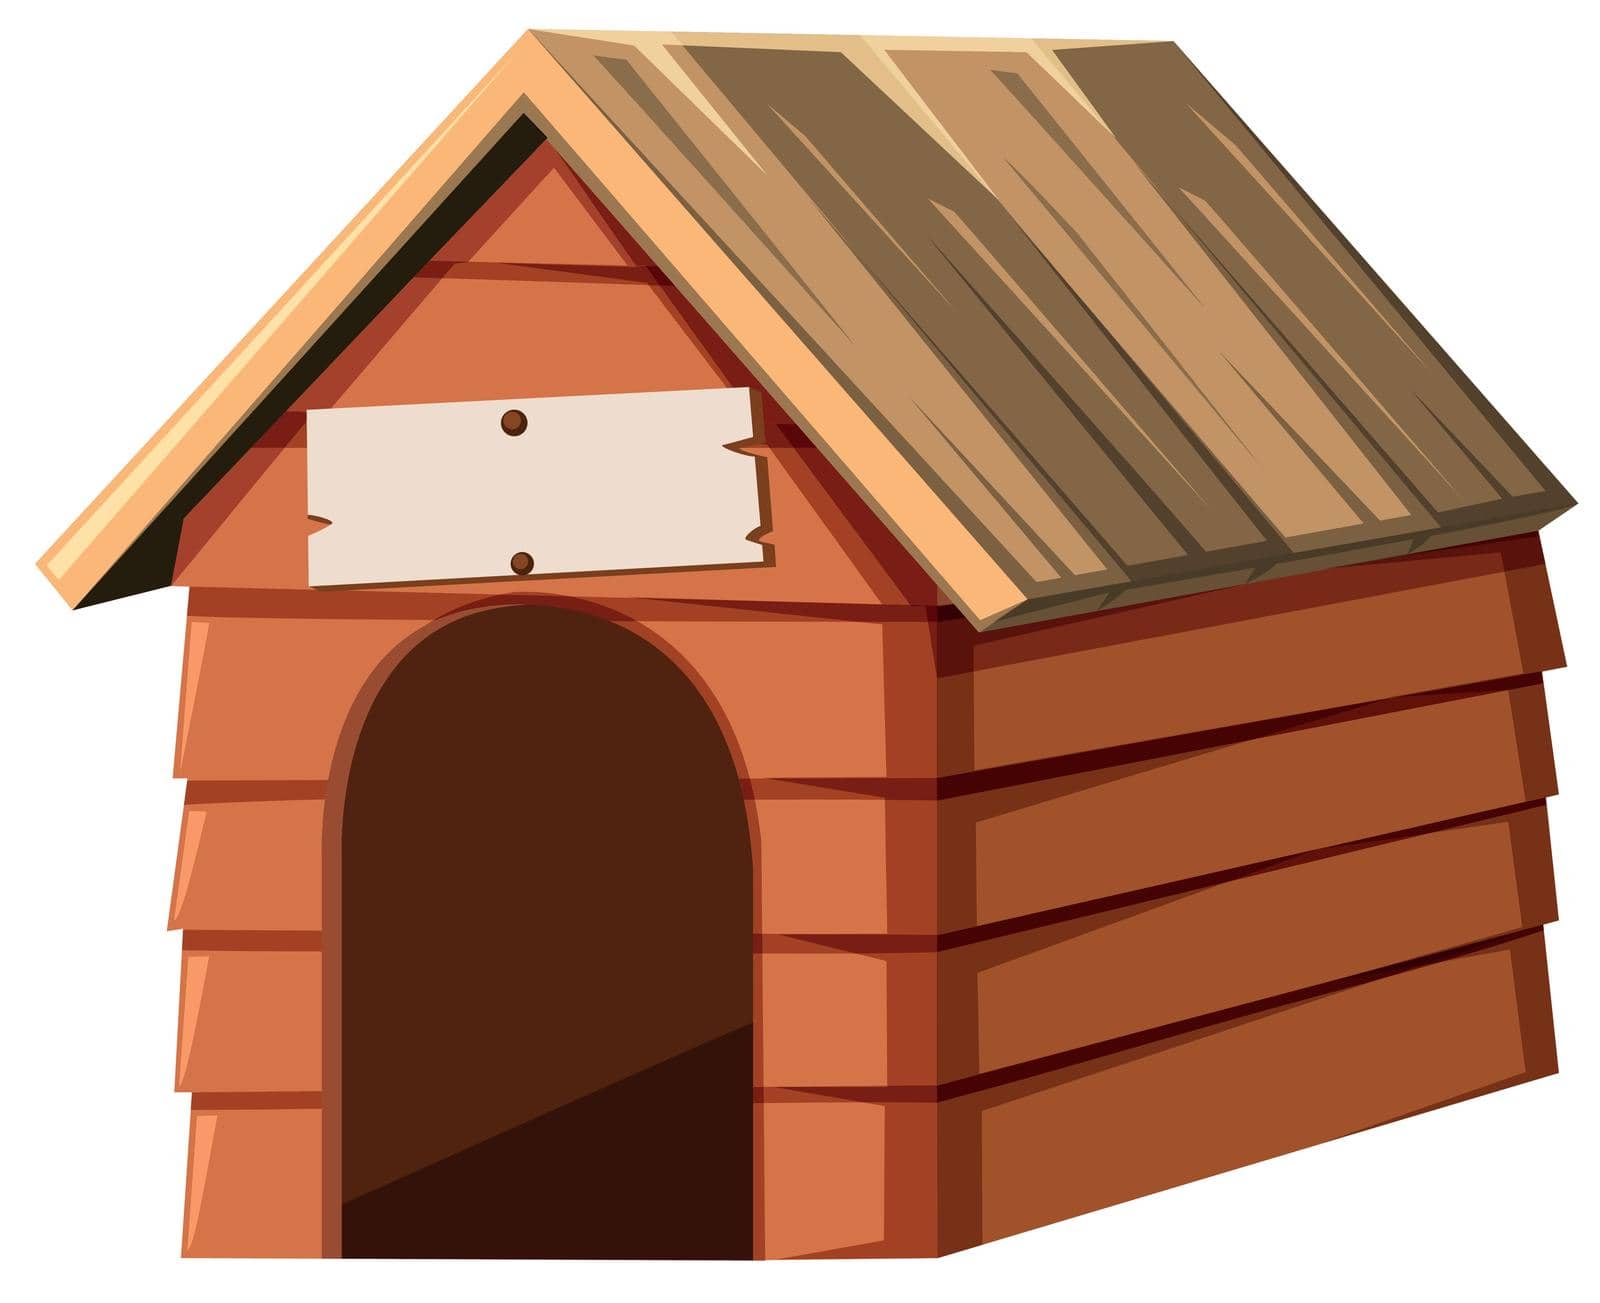 Doghouse made of wood illustration